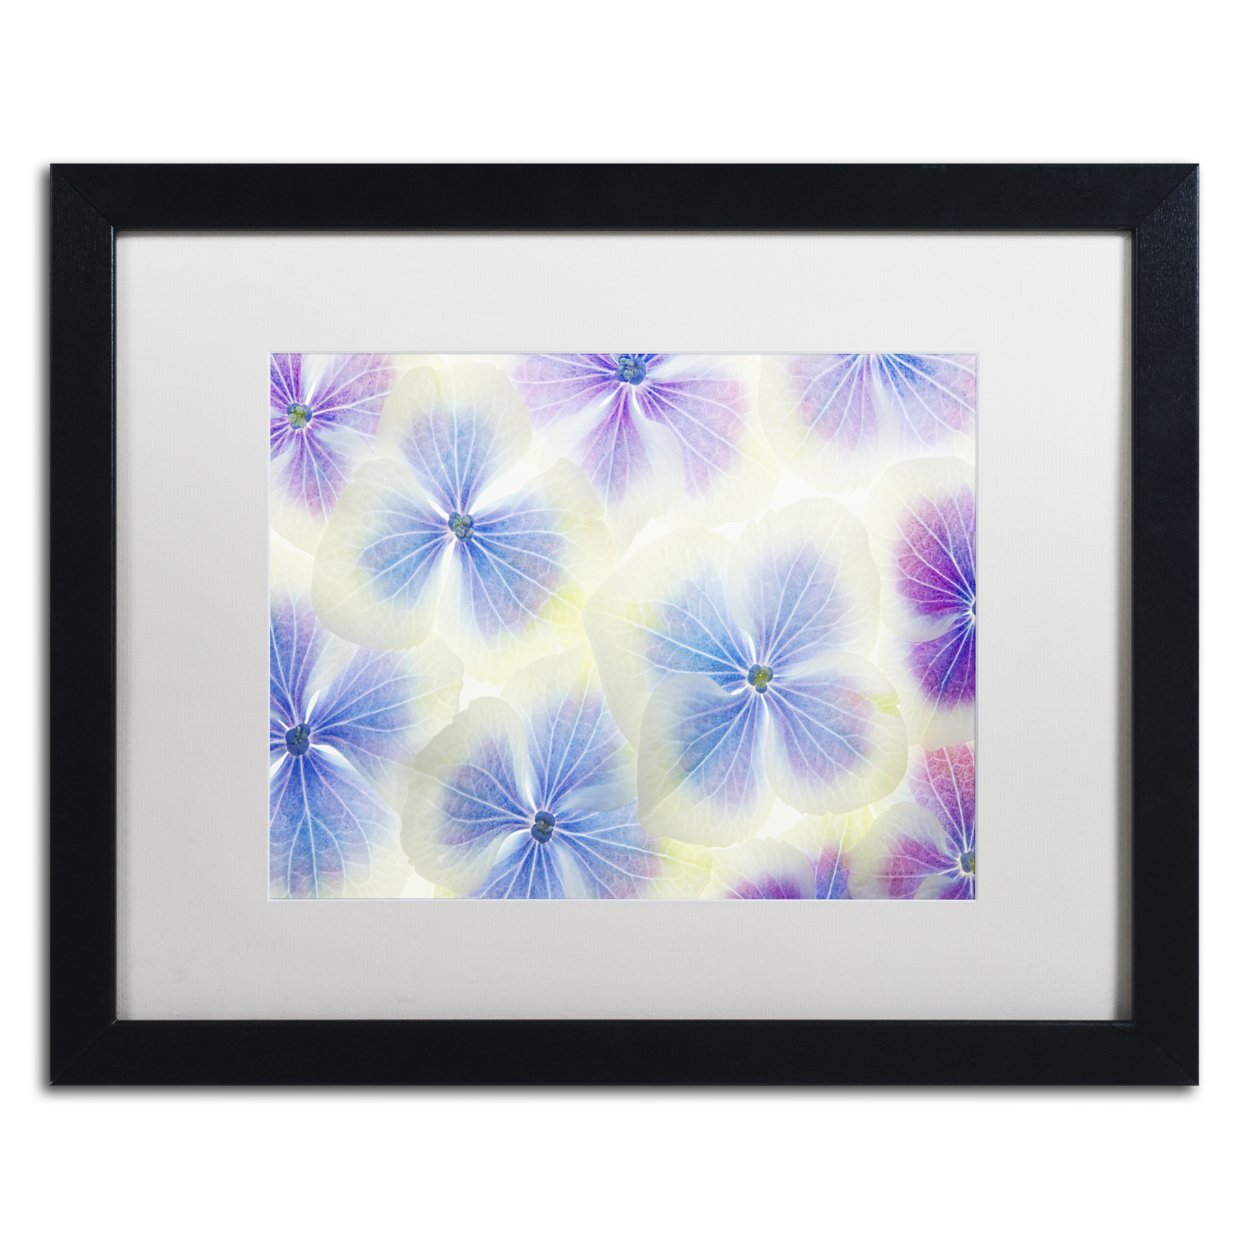 Cora Niele 'Blue And White Hydrangea Flowers' Black Wooden Framed Art 18 X 22 Inches